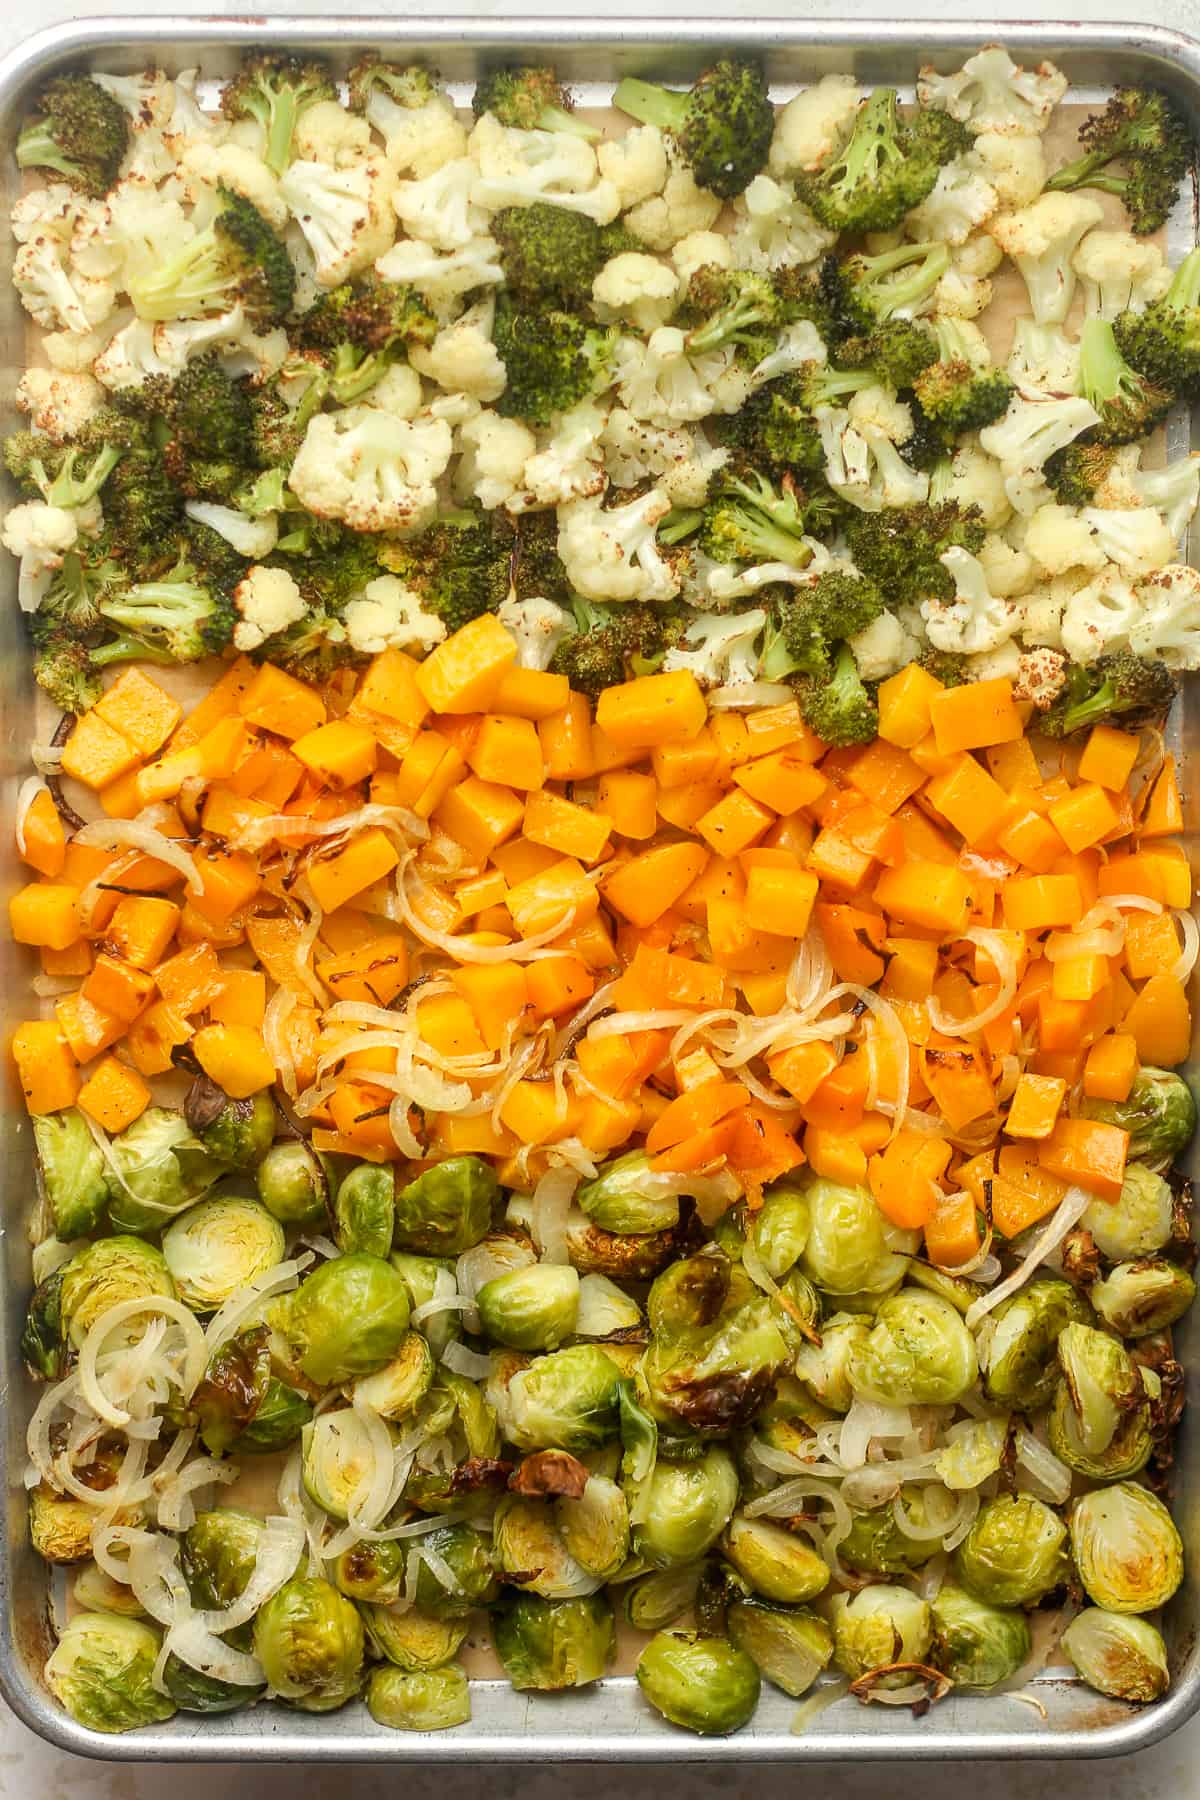 A pan of the roasted veggies by ingredient.